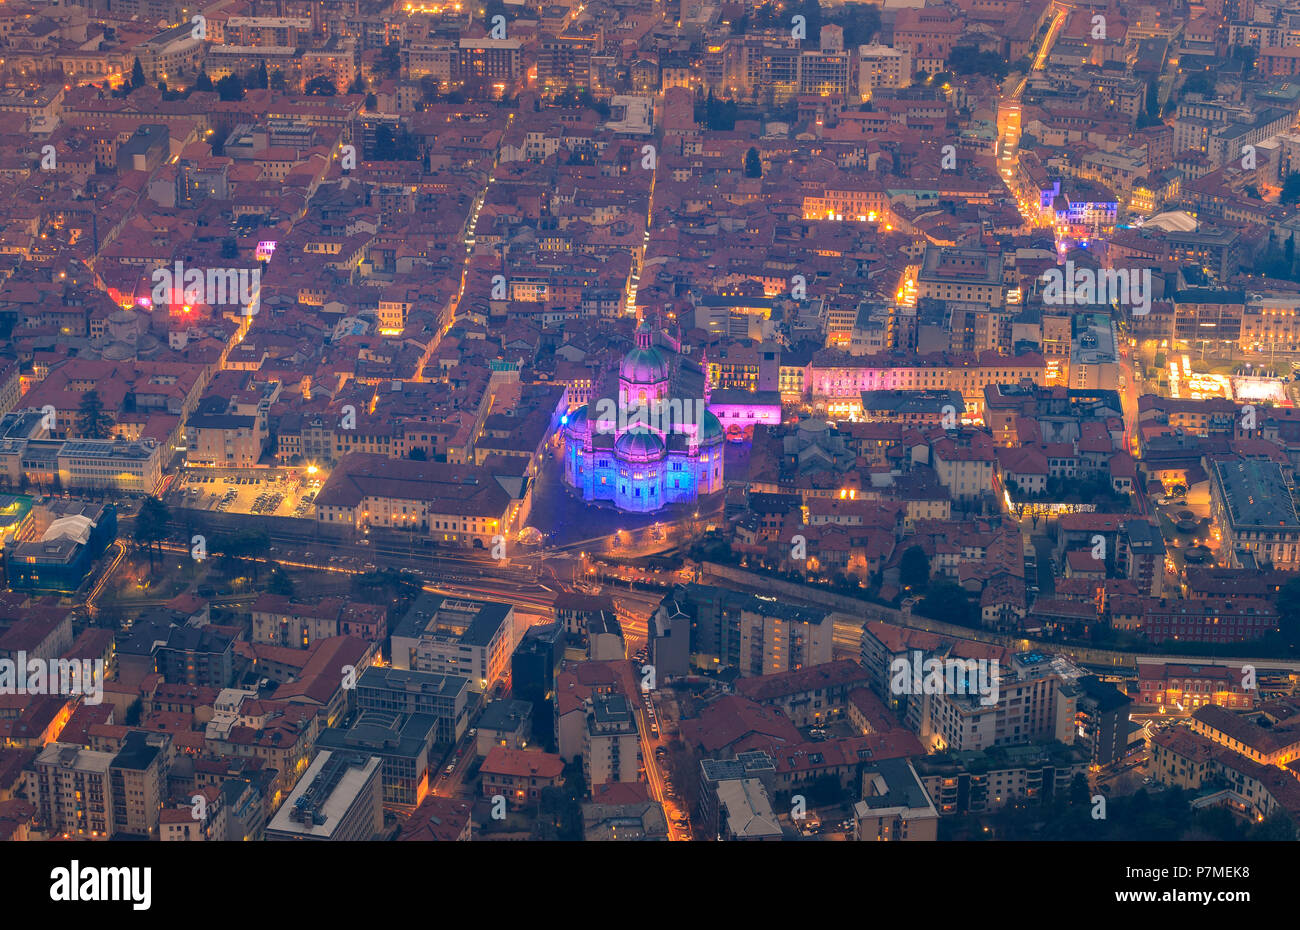 Cathedral of Como / Duomo, and other monuments of the city from above, during light festival called 'La Città dei Balocchi'. Como, Como Lake, Lombardy, Italy, Europe, Stock Photo